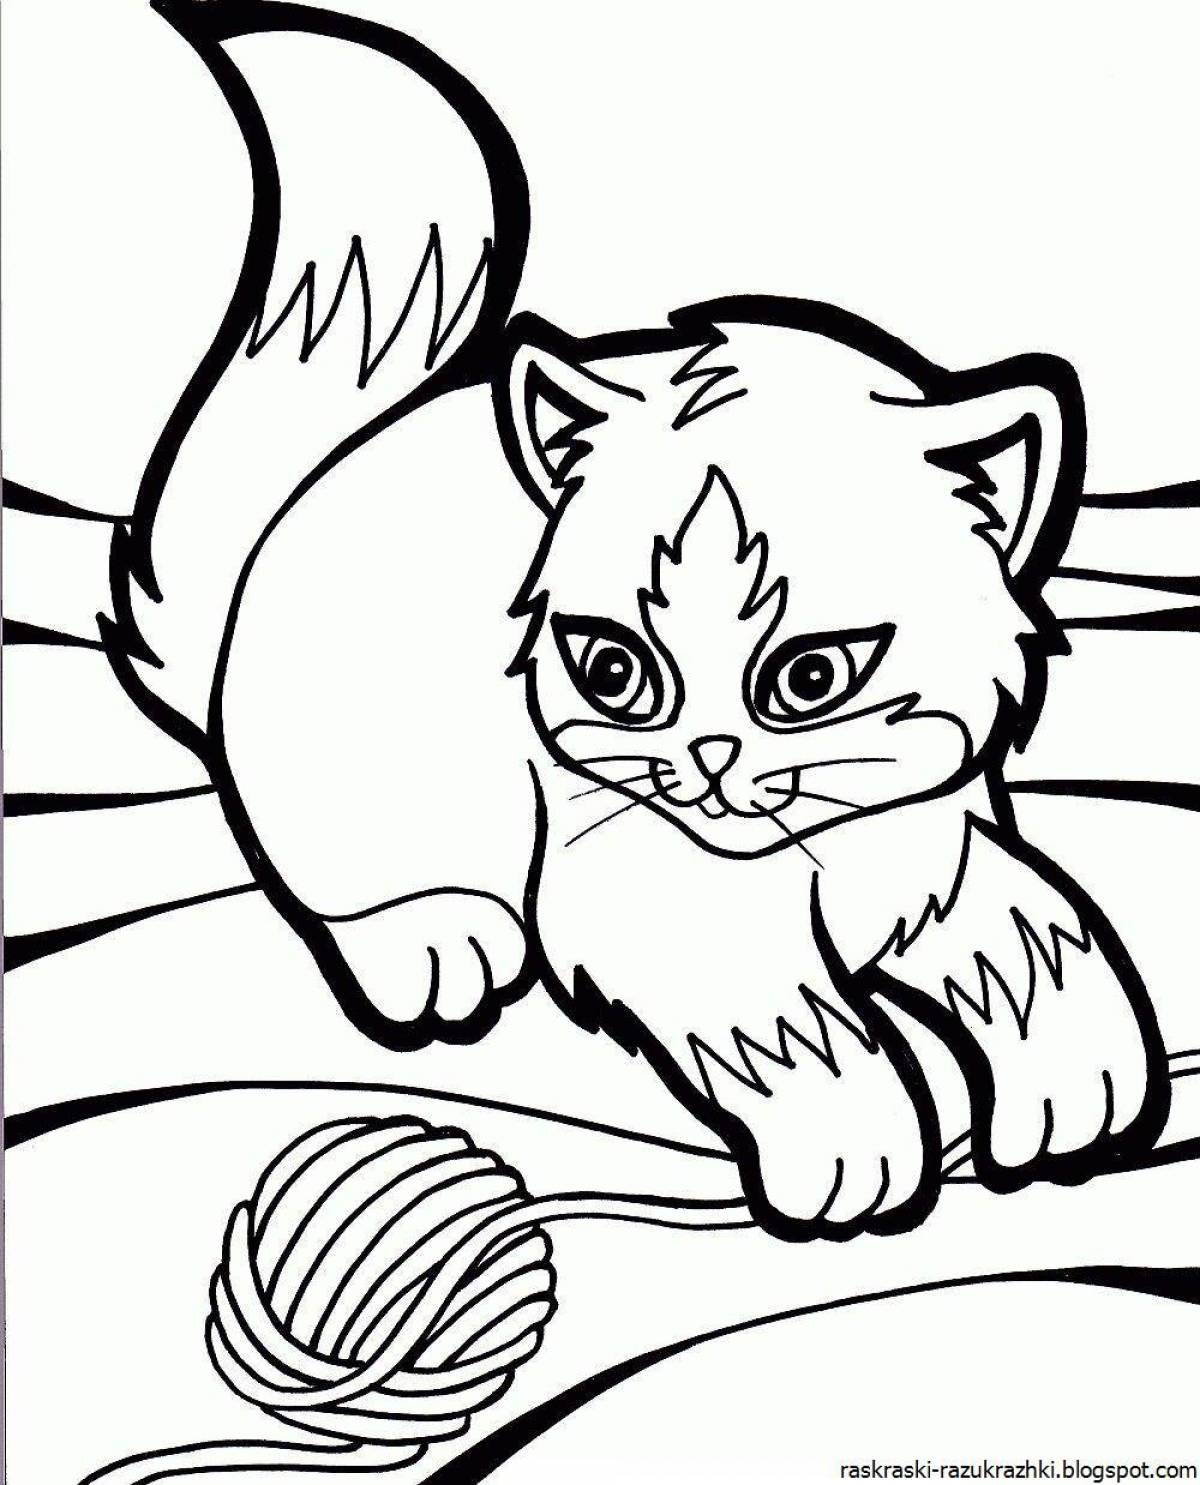 Colorful kitty coloring book